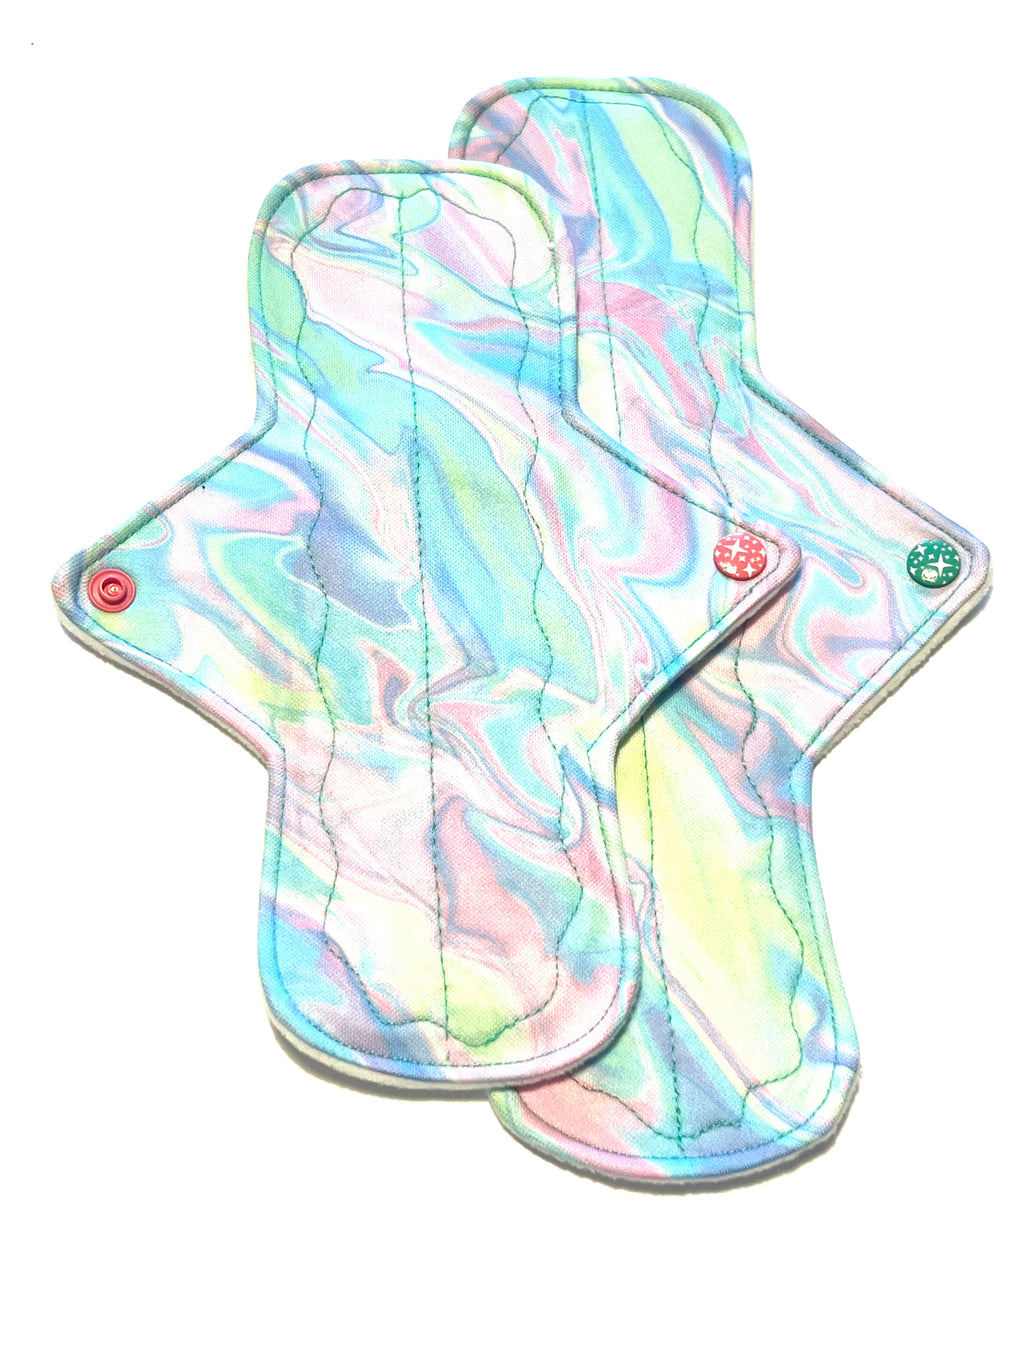 LIMITED EDITION Candy Swirl Performance Piqué 9 or 11 Inch Straight Style Reusable Cloth Pads